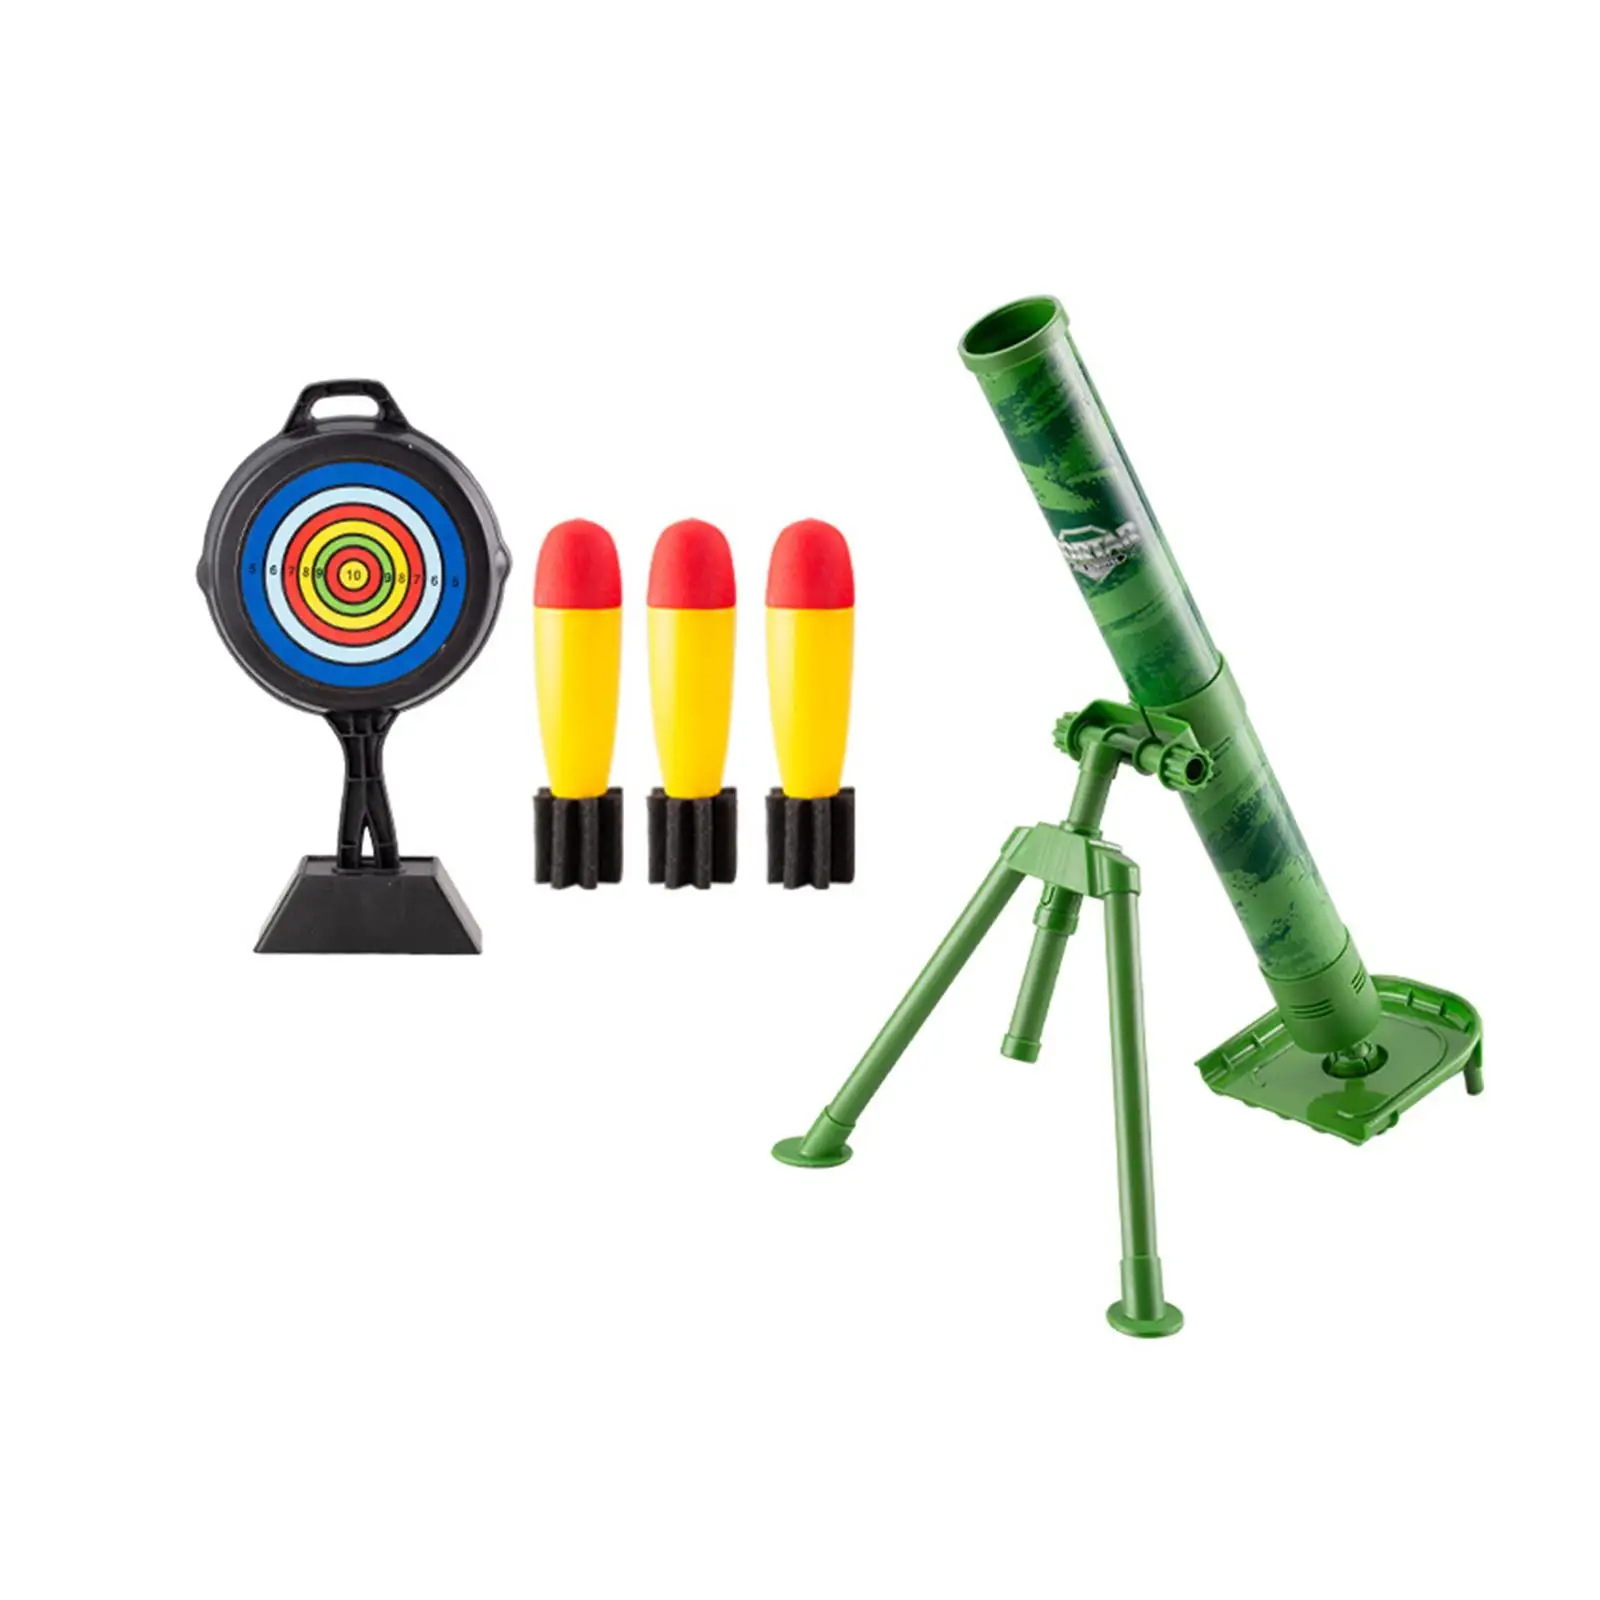 Mortar Launcher Toys Chase Rocket for Kids Boys and Girls Birthday Present